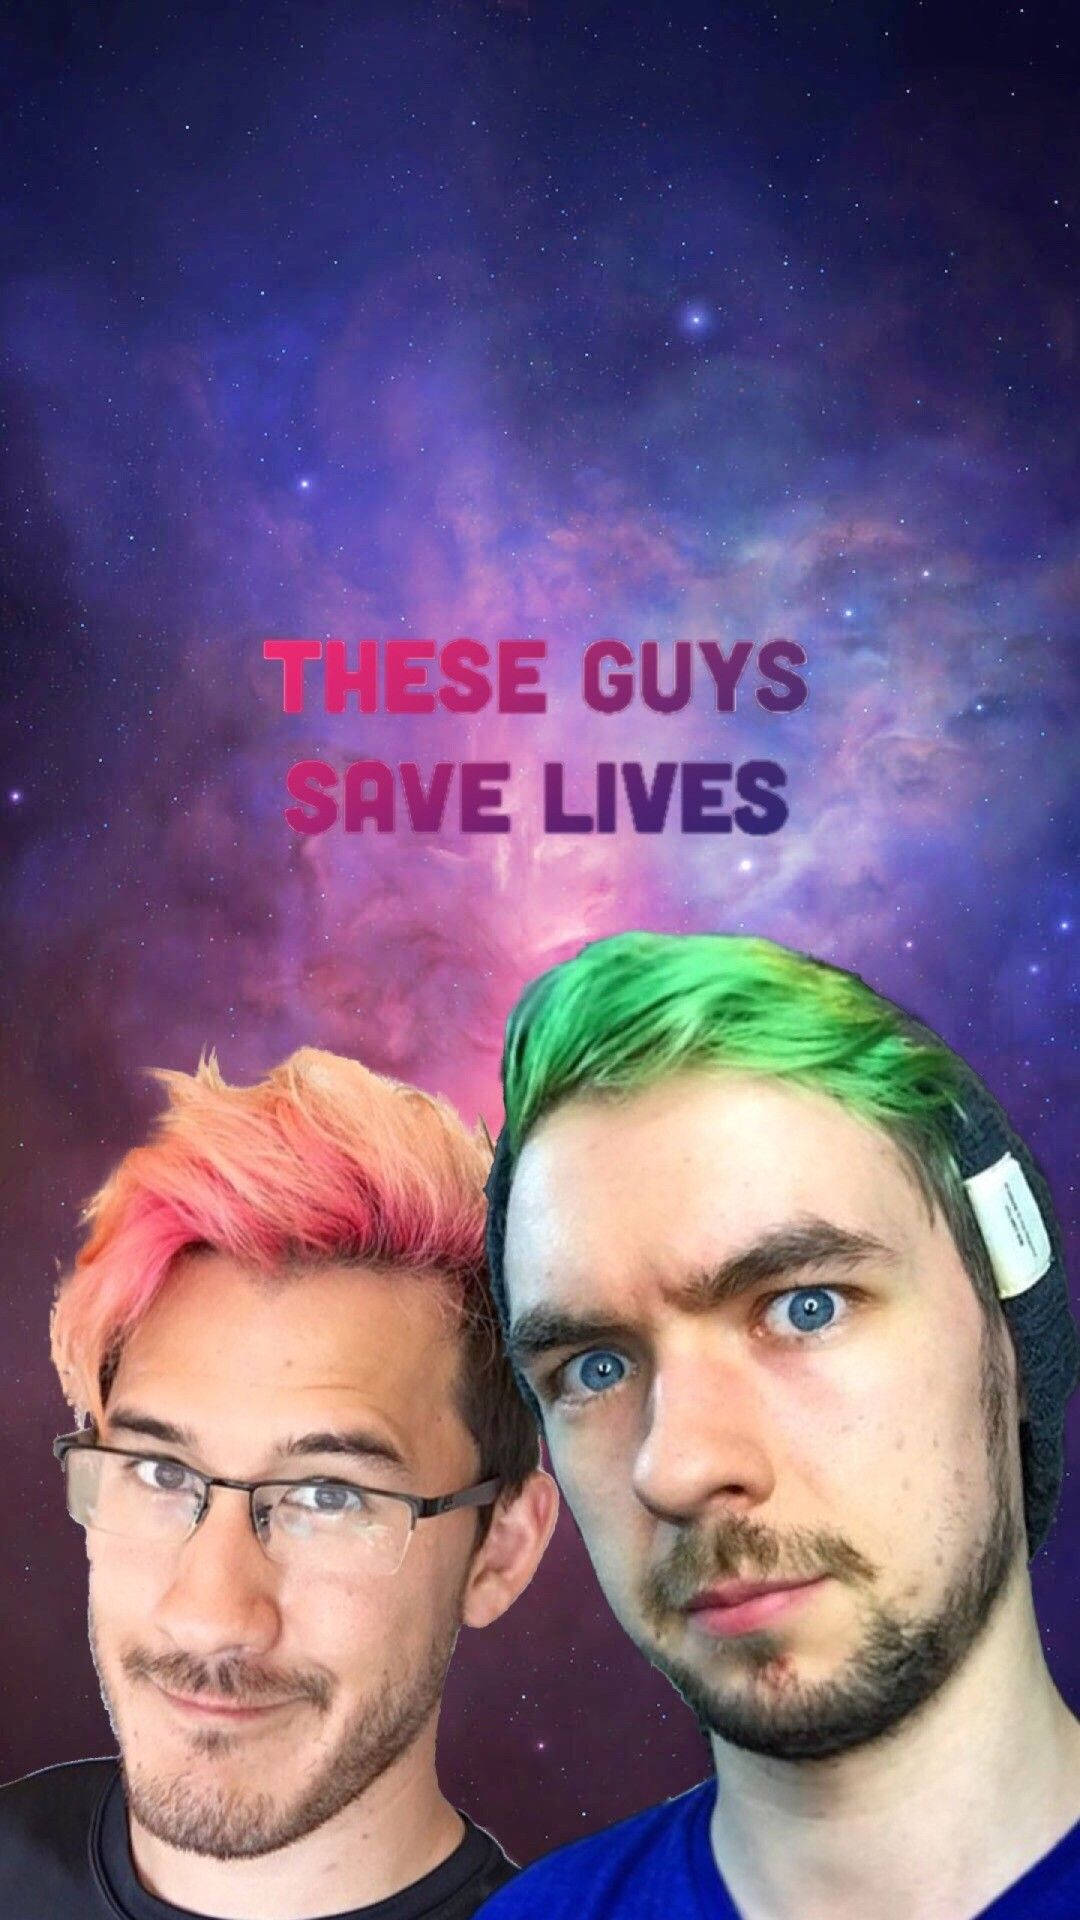 Two guys with pink hair and green eyes - Markiplier